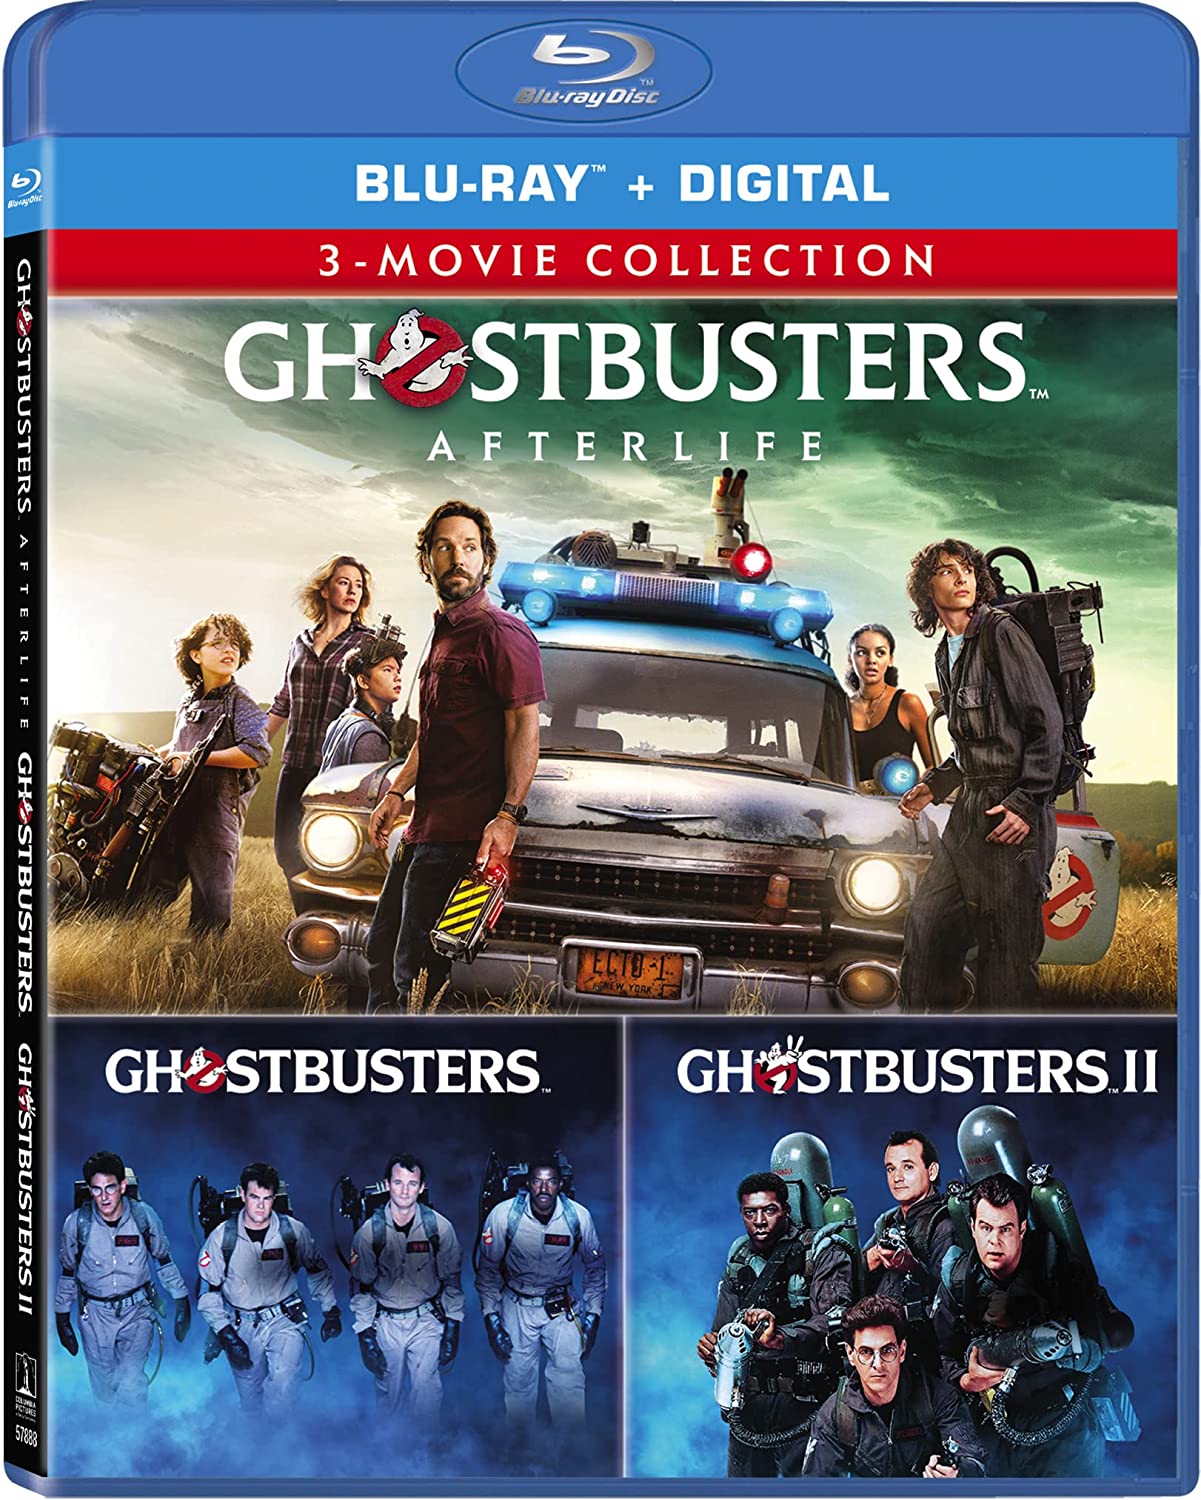 Ghostbusters 3-Movie Collection Blu-ray